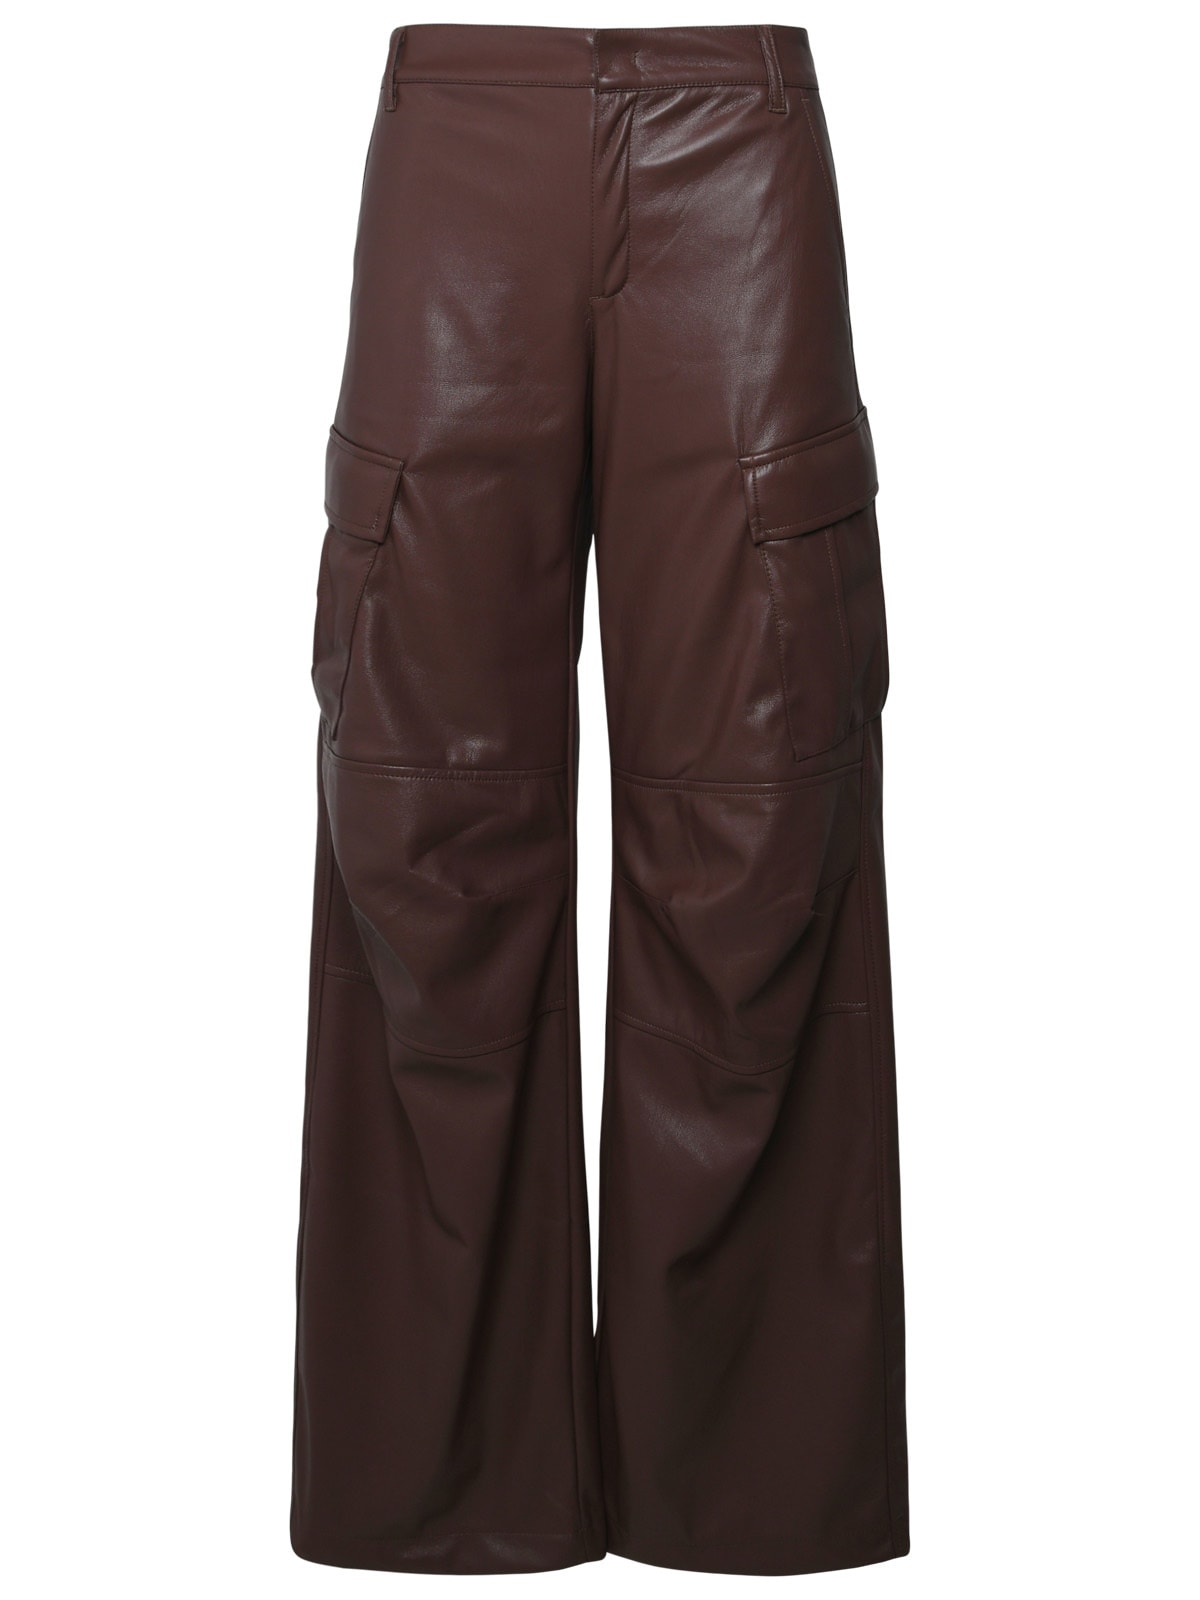 Brown Polyester Blend Trousers